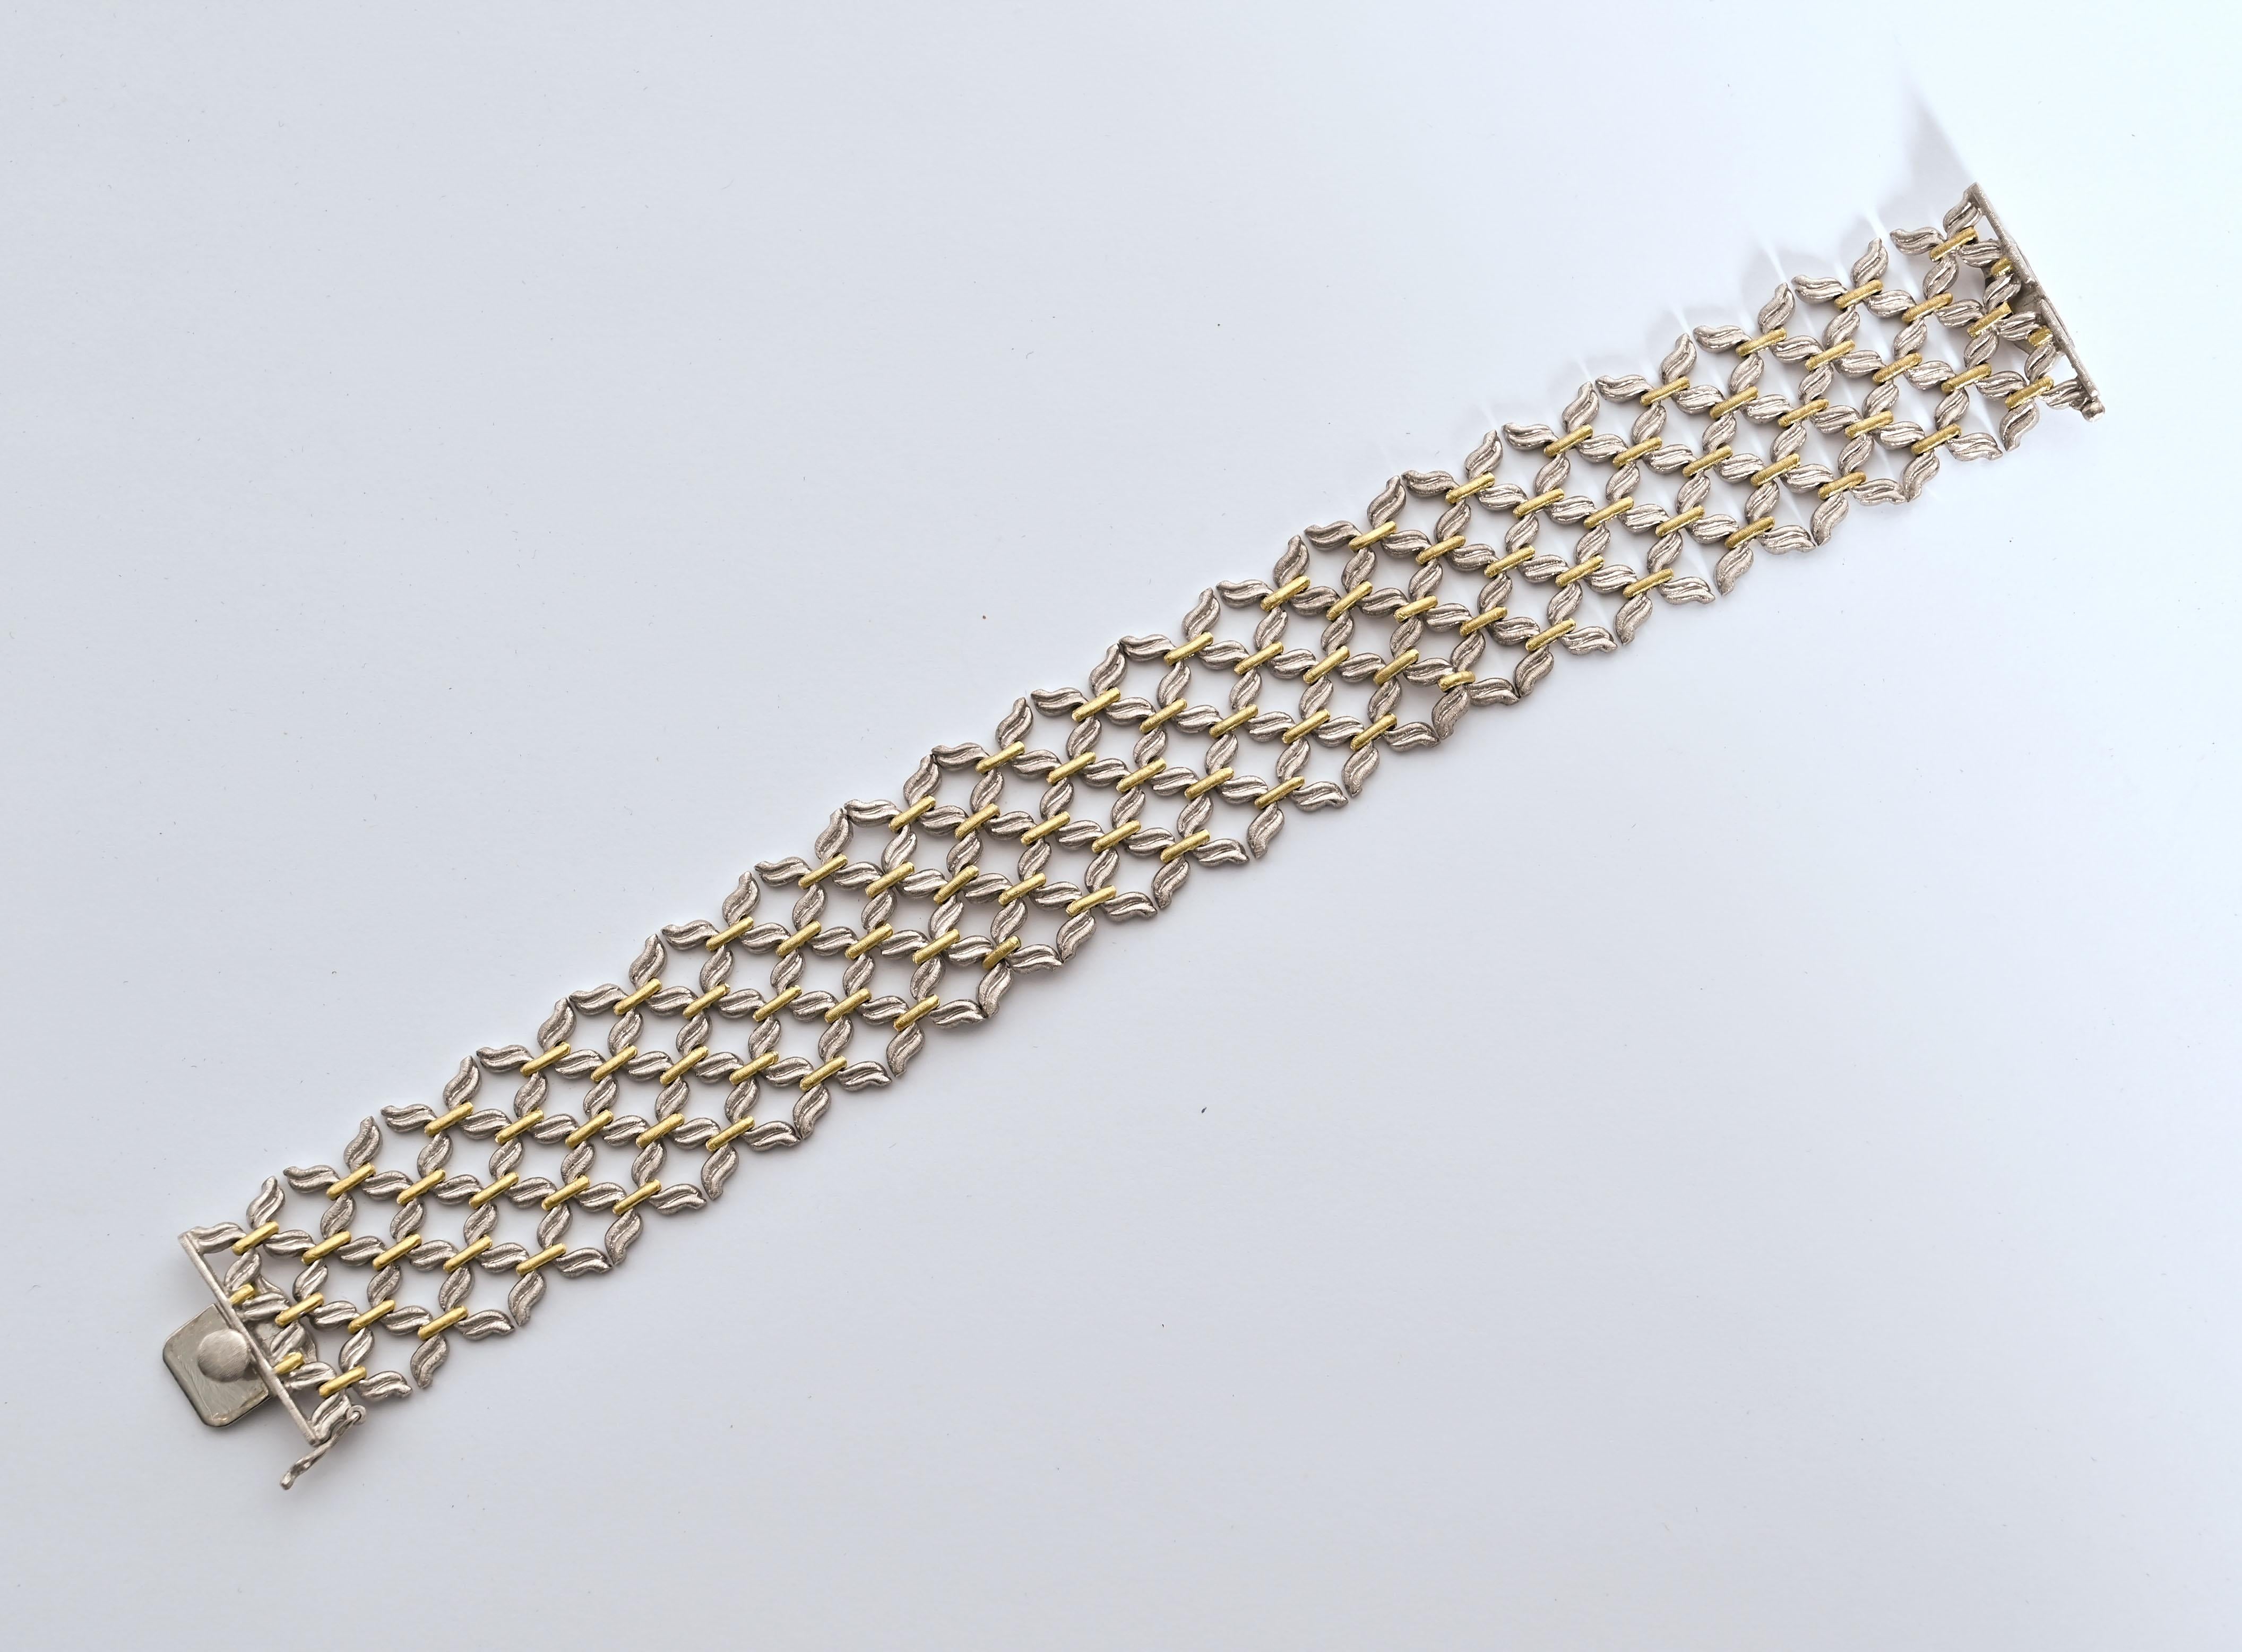 Finely made, delicate woven links bracelet by Gianmaria Buccellati. Curved links of white gold alternate with straight yellow gold bars to create an unusual woven pattern. The bracelet is 7/8